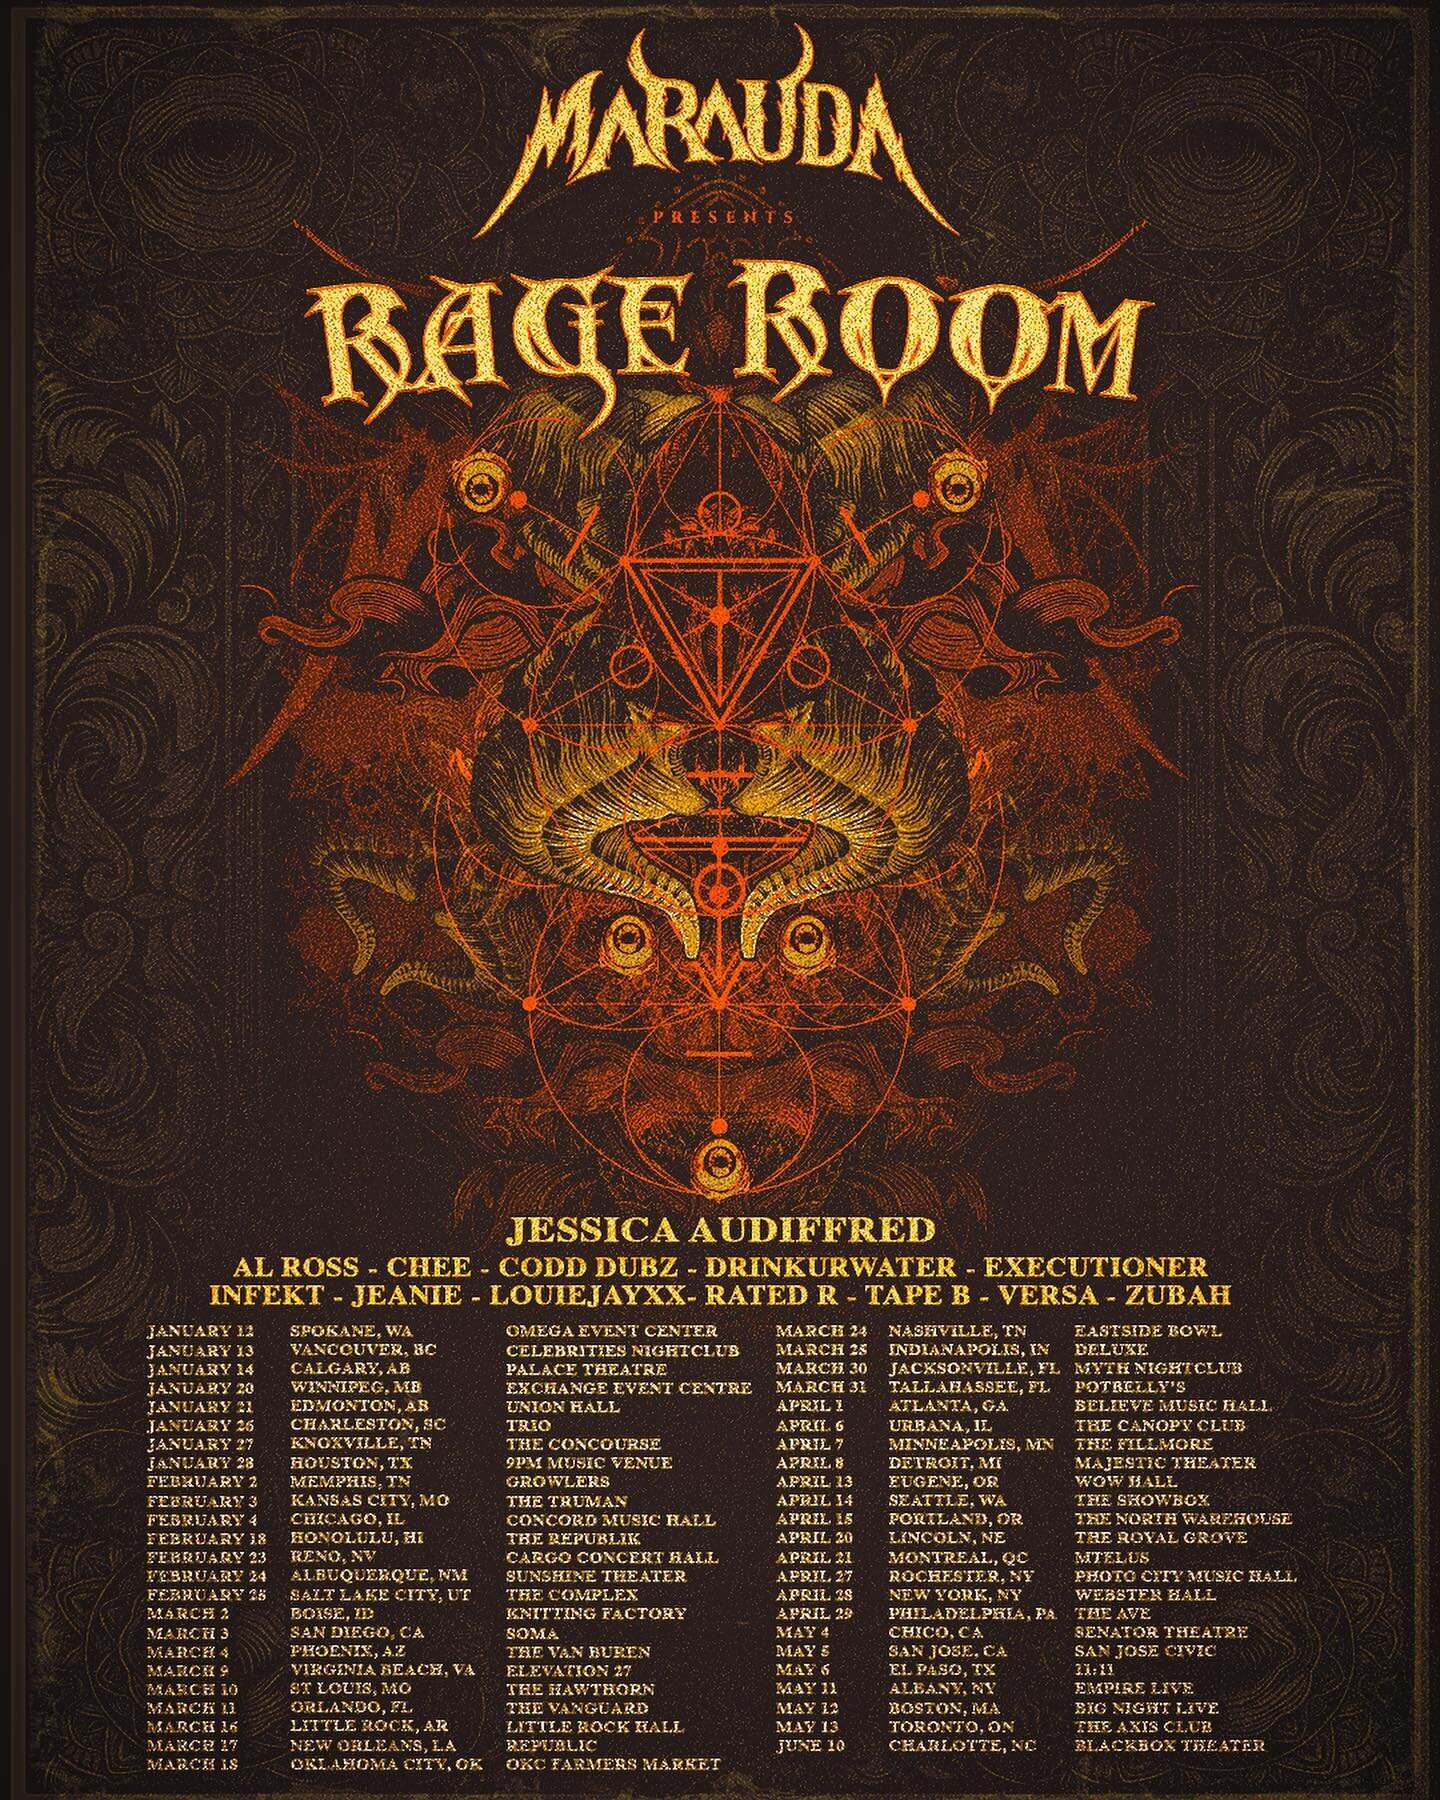 Just announced! @jessica_audiffred special guest on @maraudamusic #rageroom tour!

Ticket links coming soon!